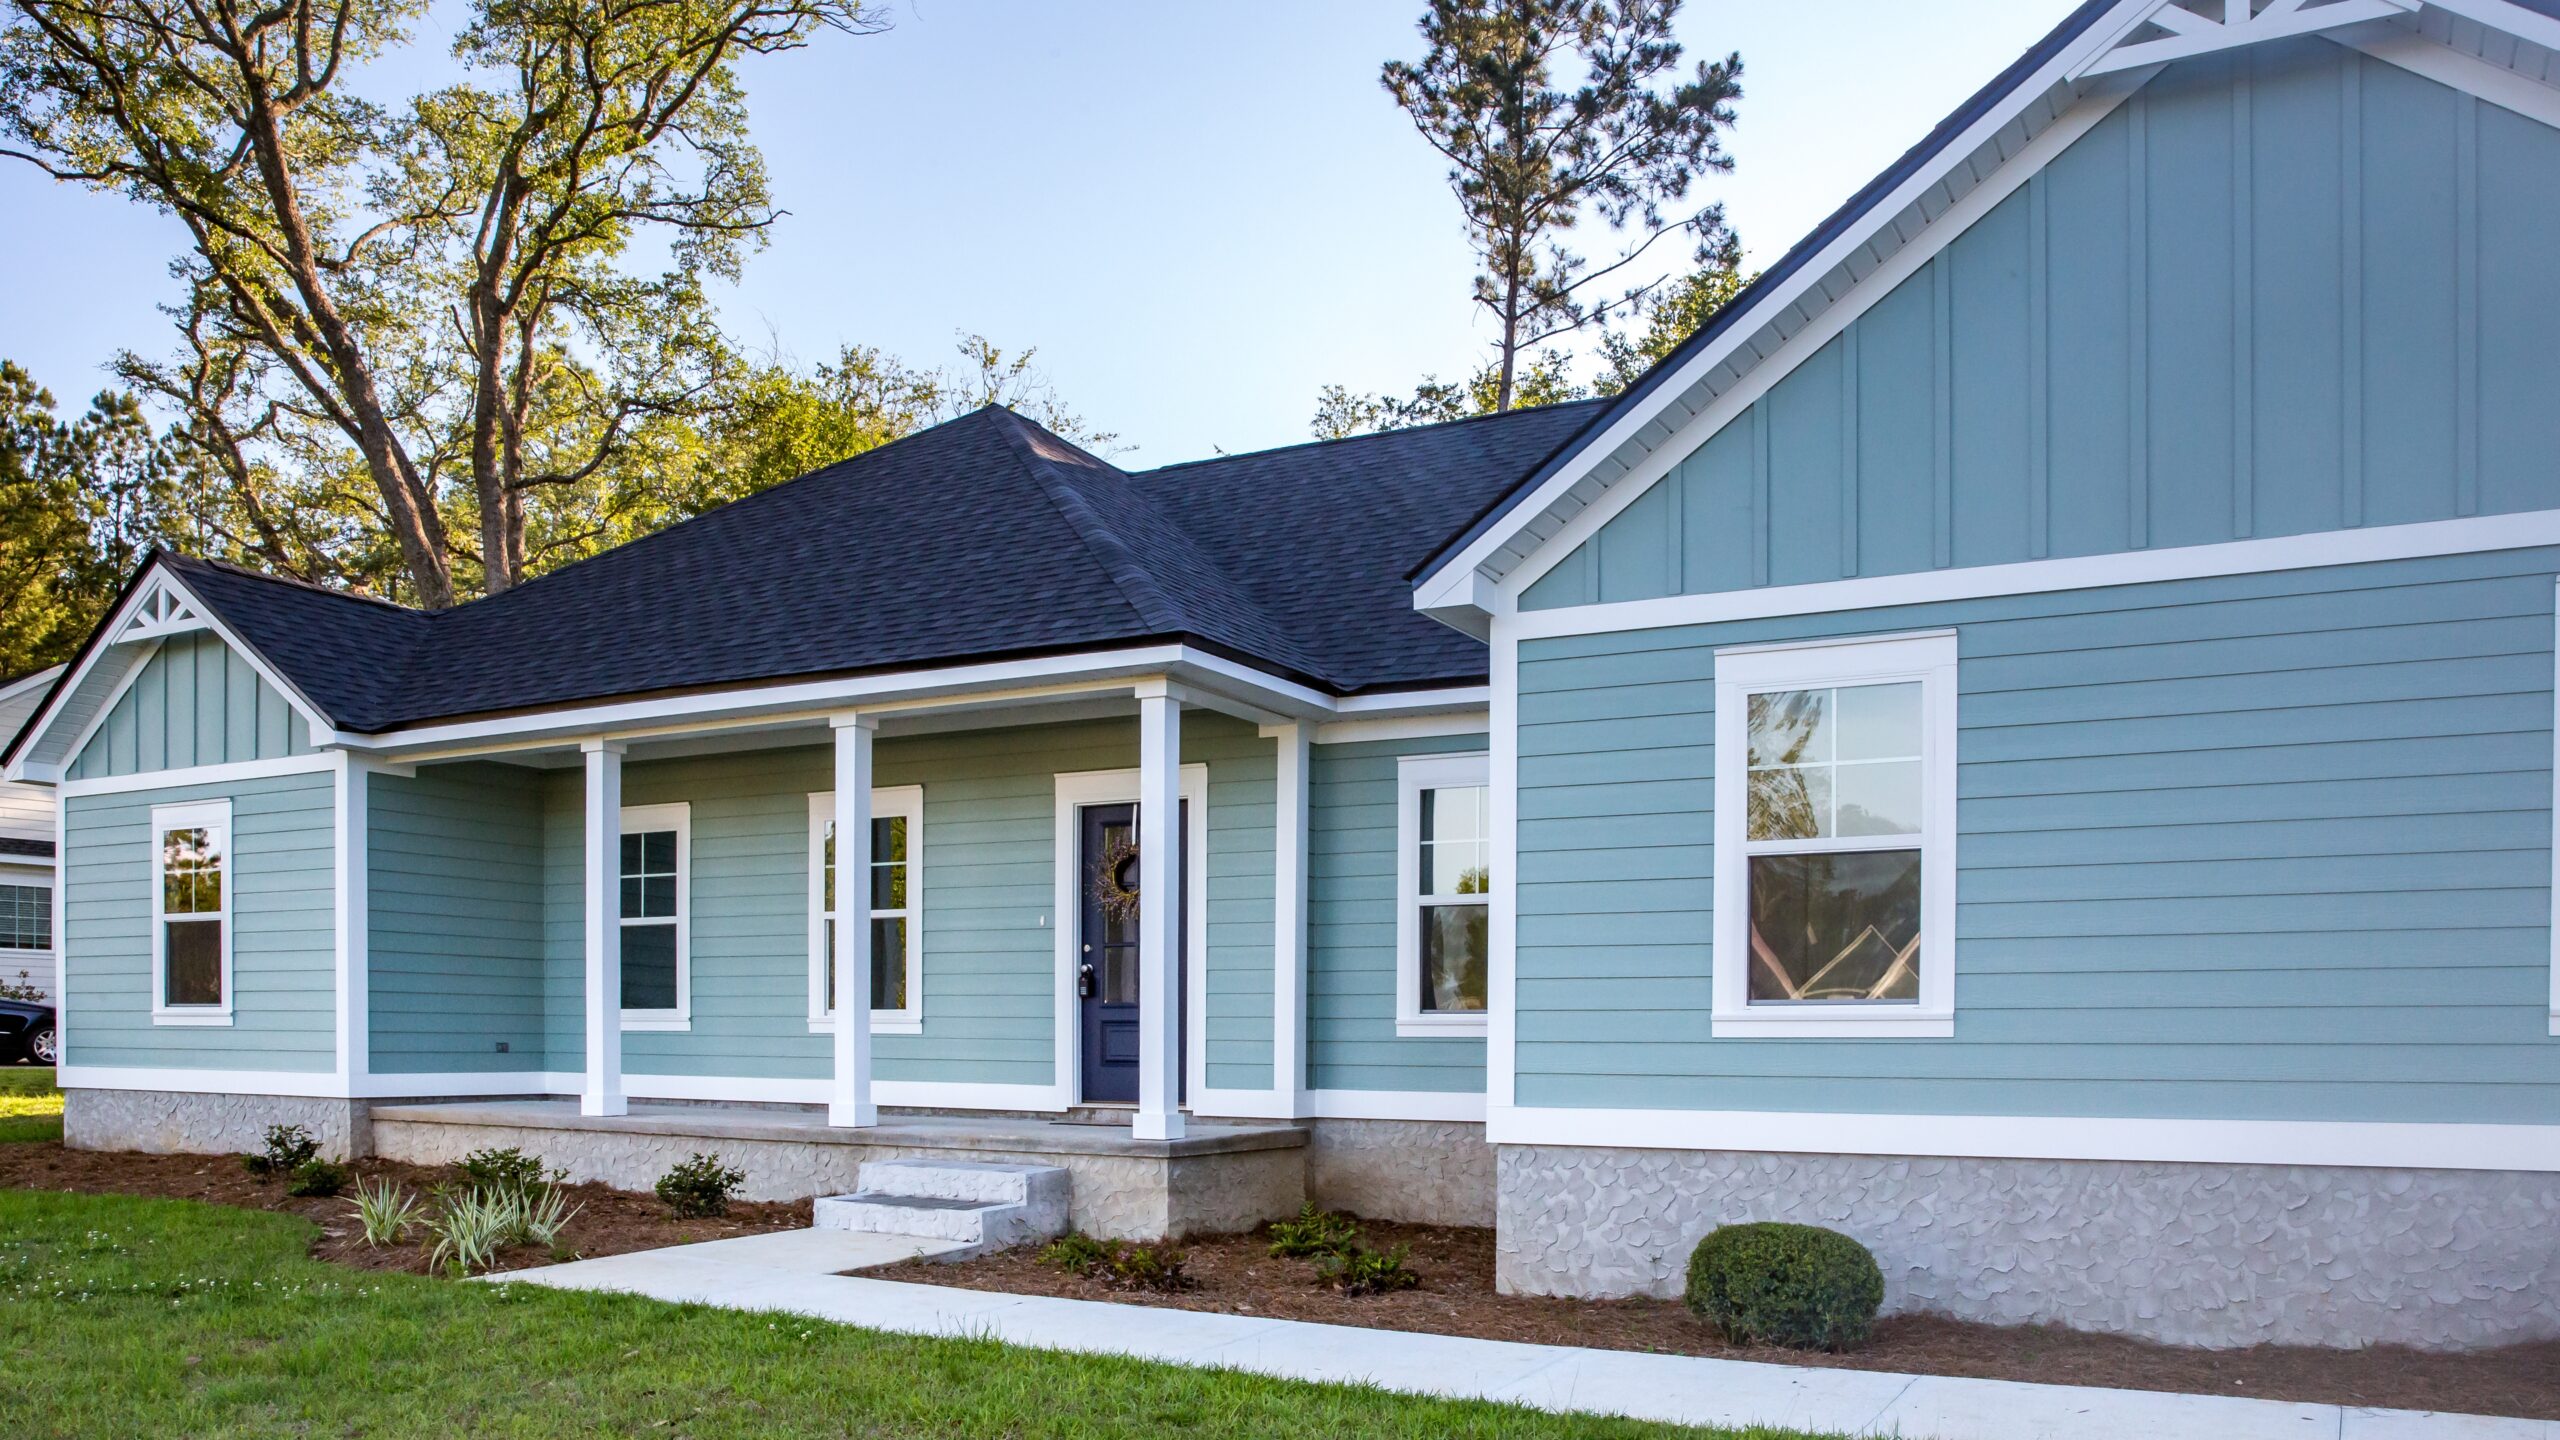 A home with blue vinyl siding and white trim